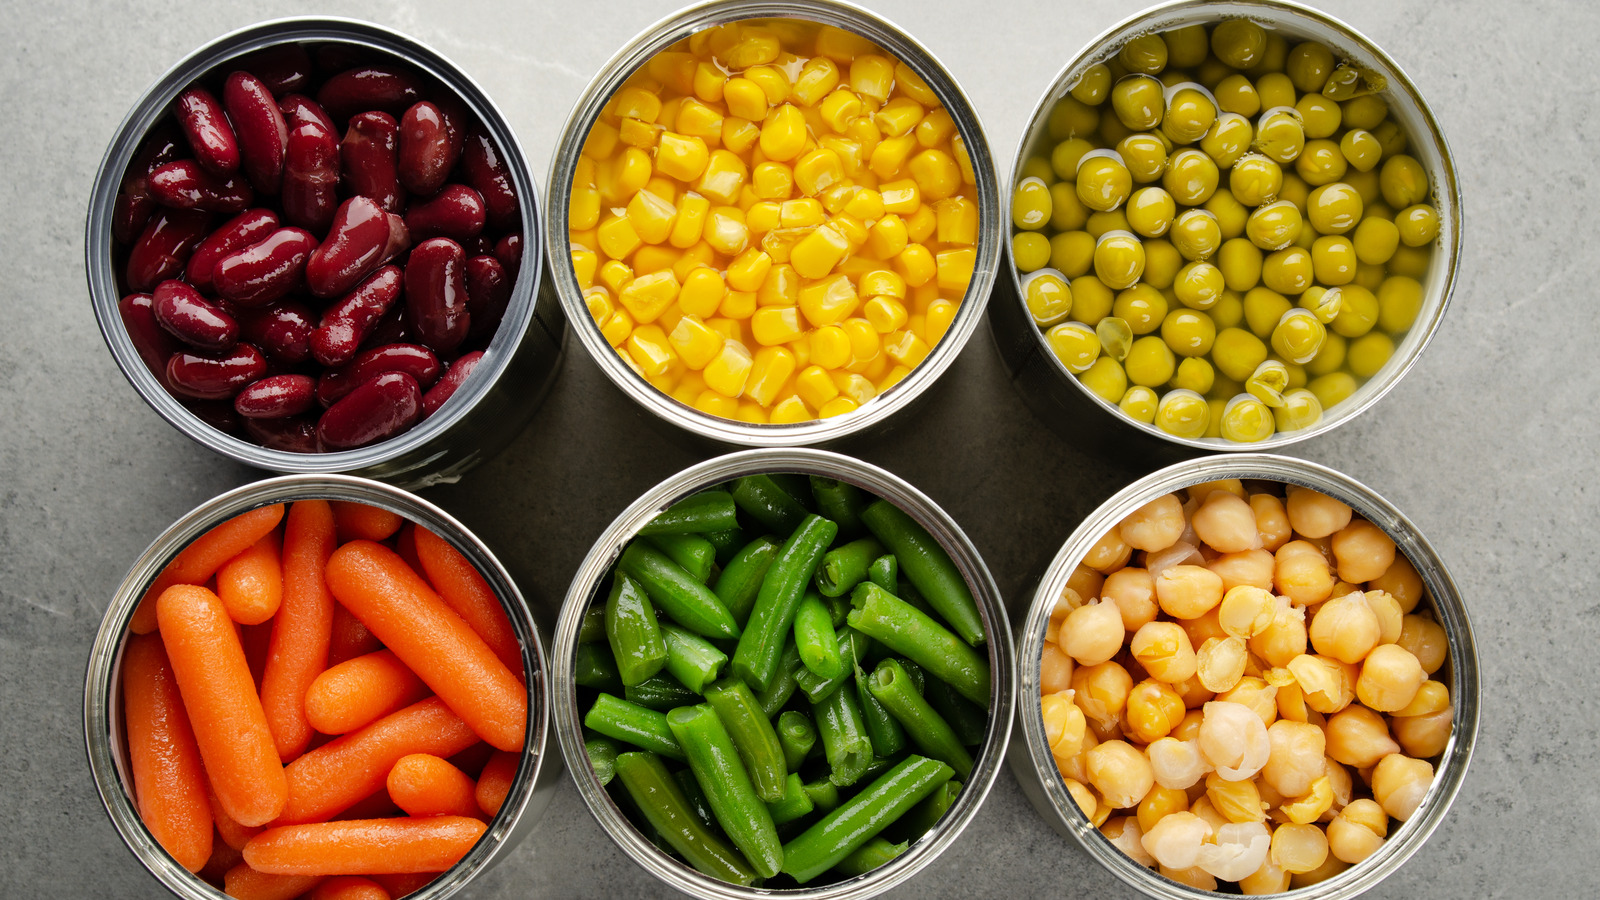 How Long Does Canned Vegetables Last